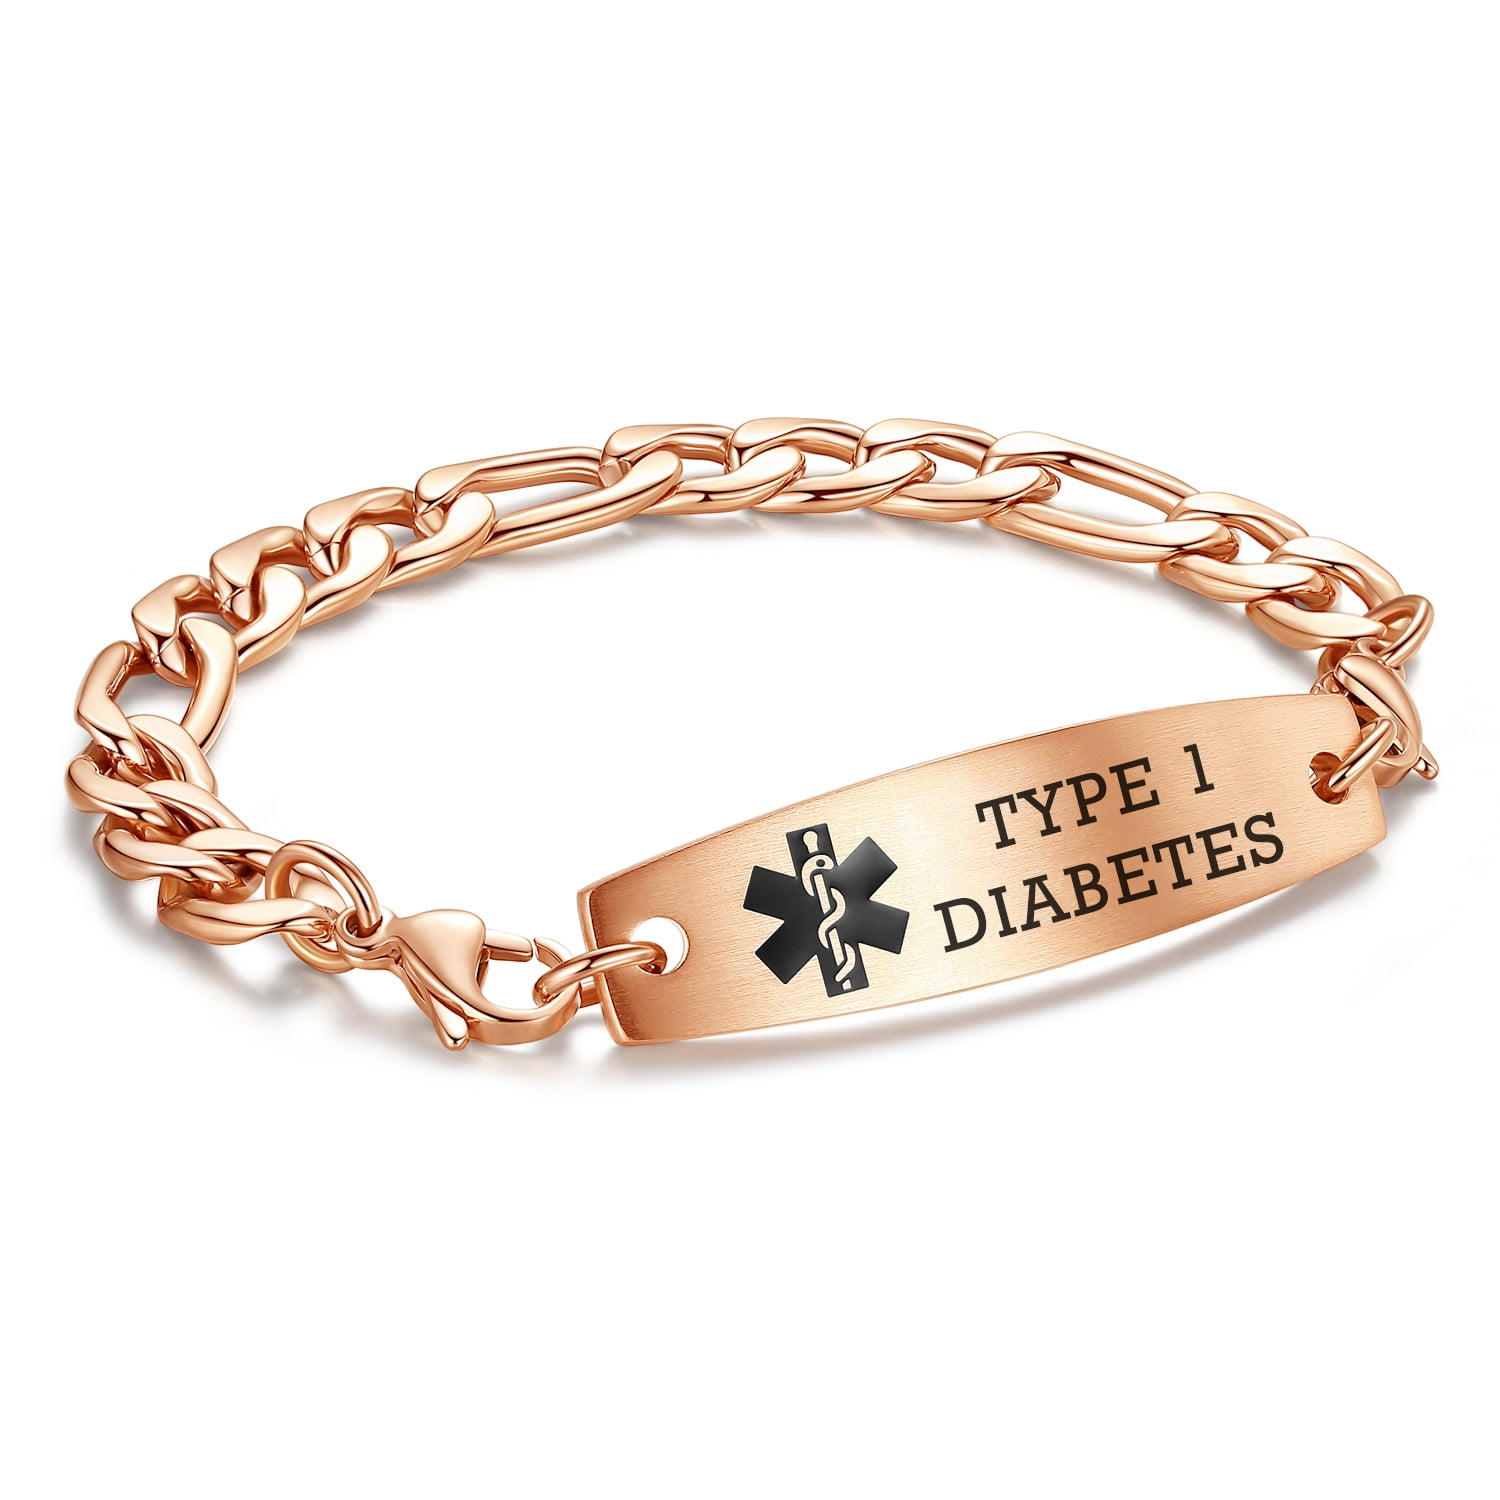 Stainless Steel Engraved Medical Alert Bracelet Unisex Jewelry With Gift  Box, 2020 Design For Men And Women From Oneng02, $3.25 | DHgate.Com